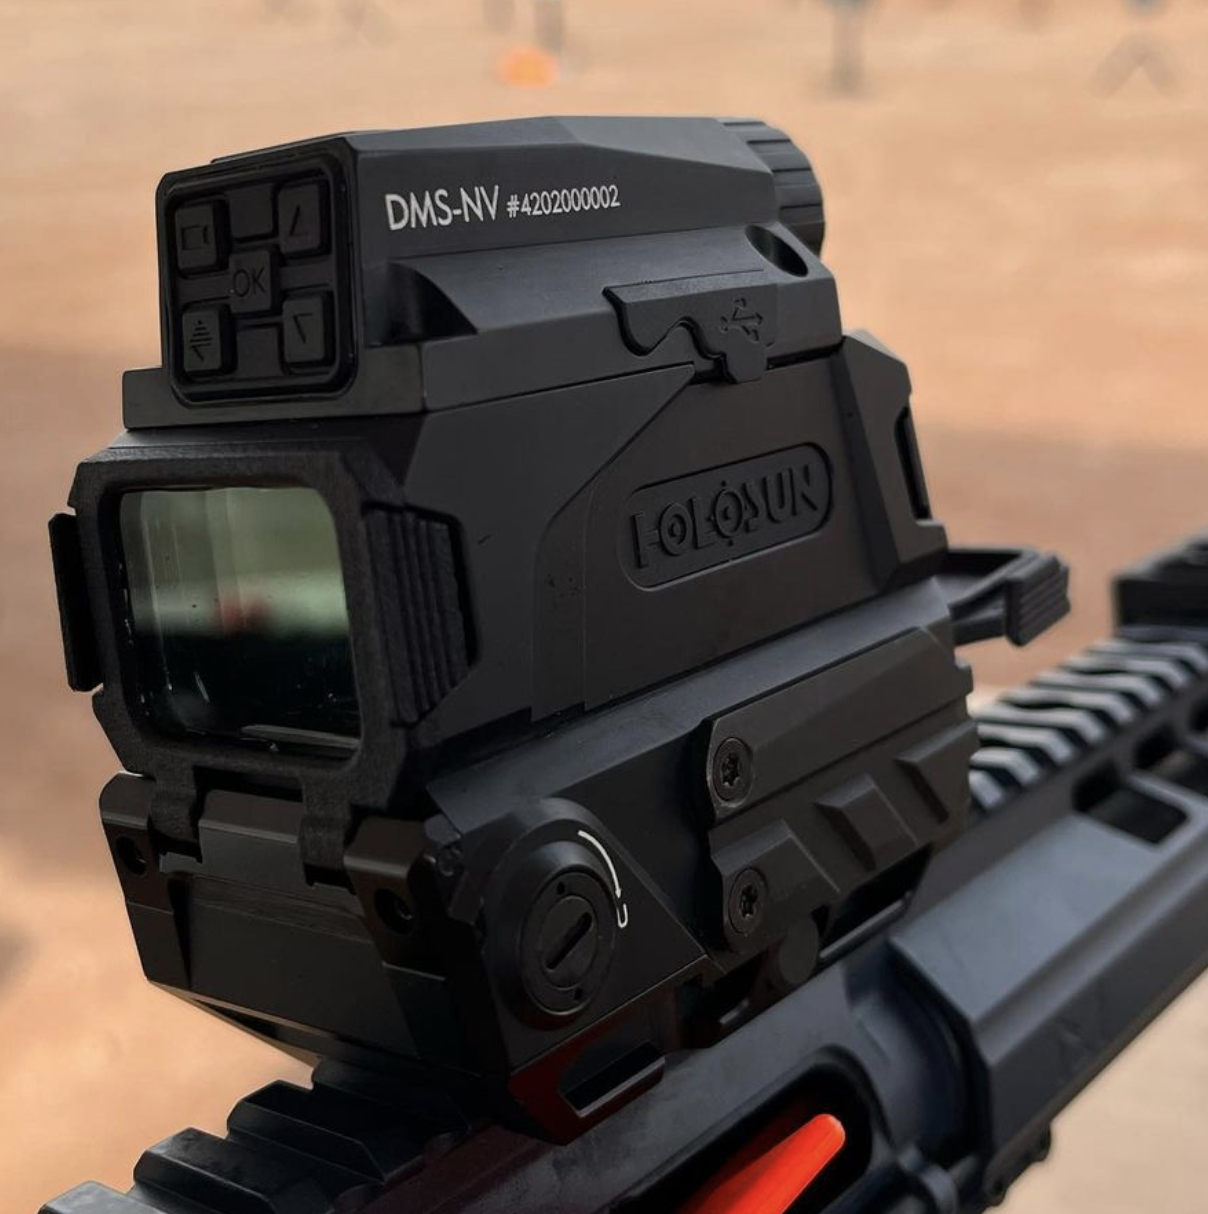 Holosun DRS: An Affordable Thermal Optic Makes Waves at SHOT Show